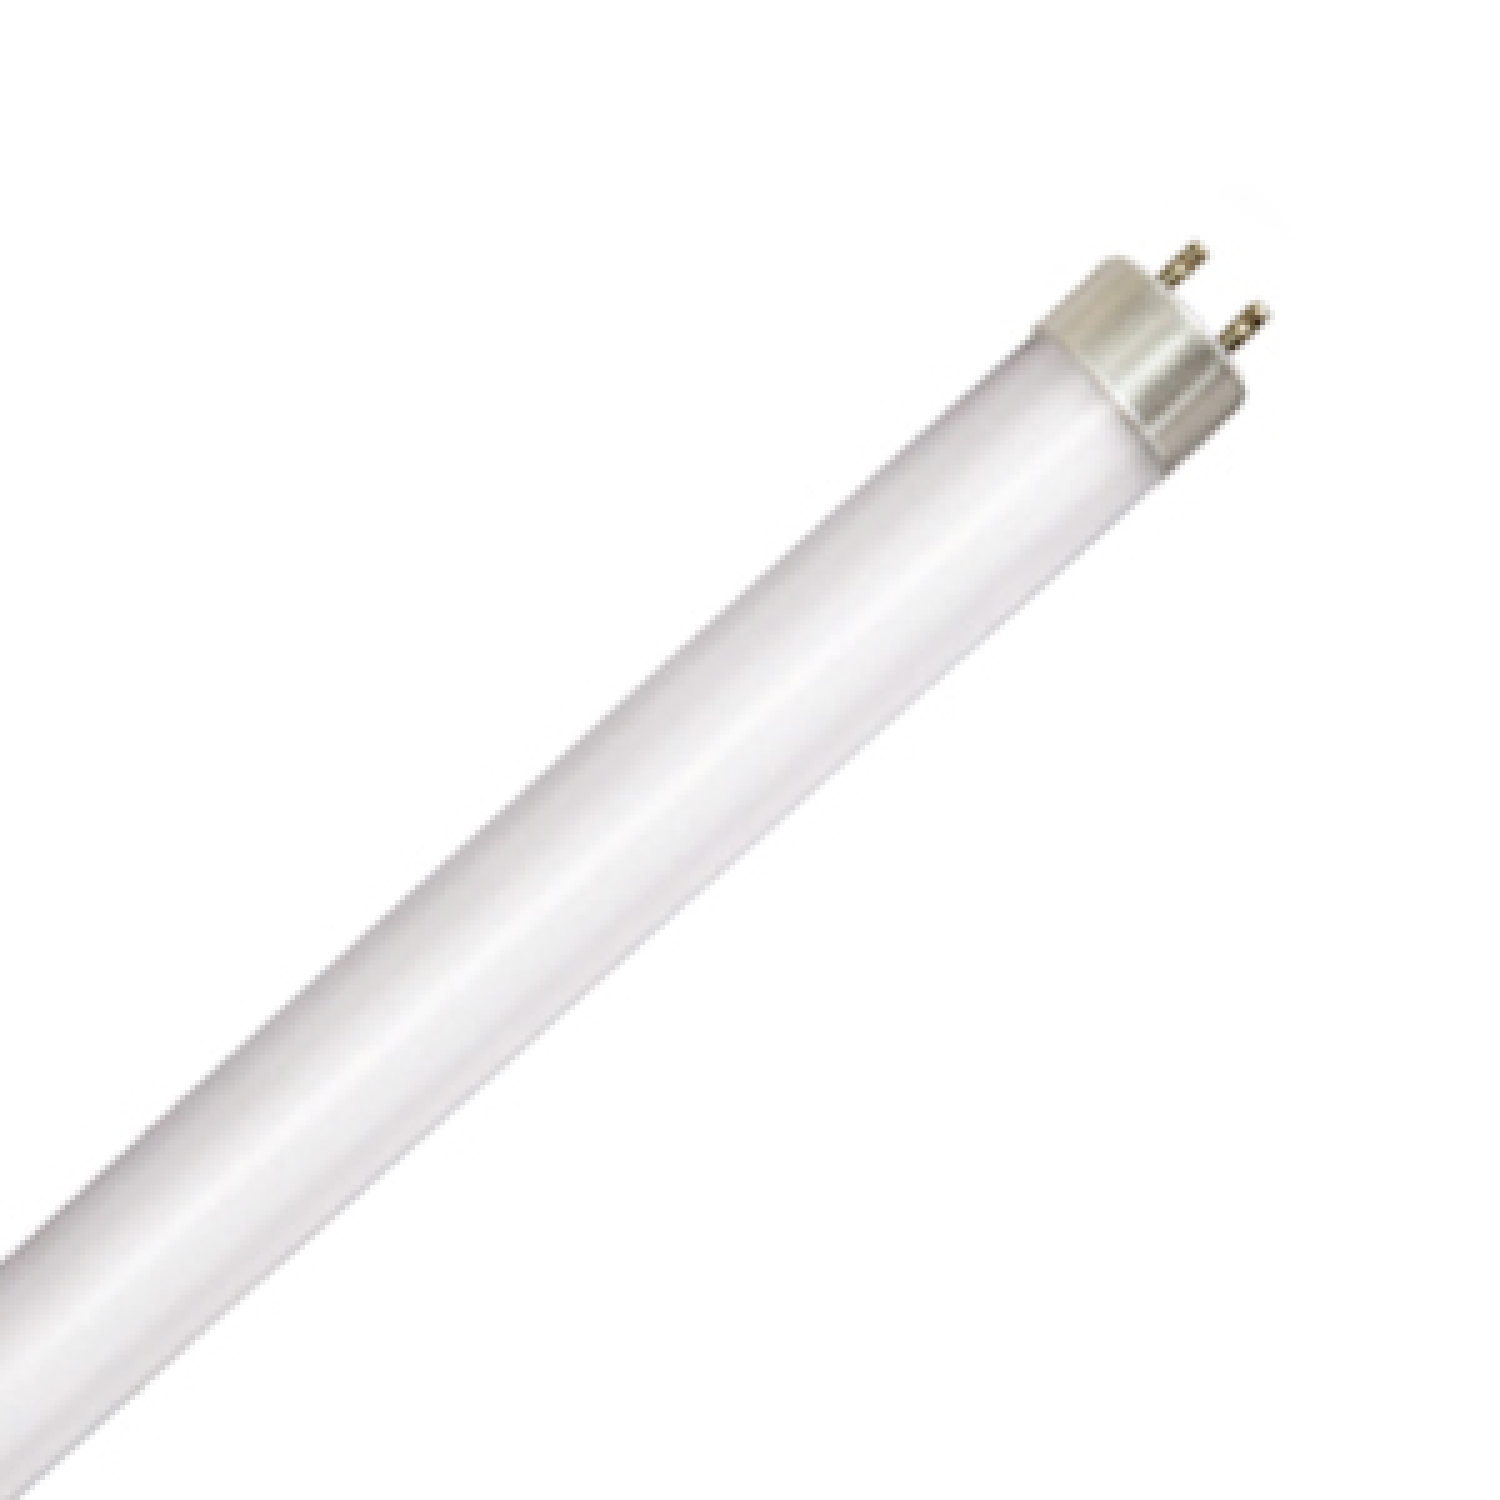 T5 LED Tube, 4ft, Frosted, Bypass, Type B, 25W, Single Ended, 3200 Lumens